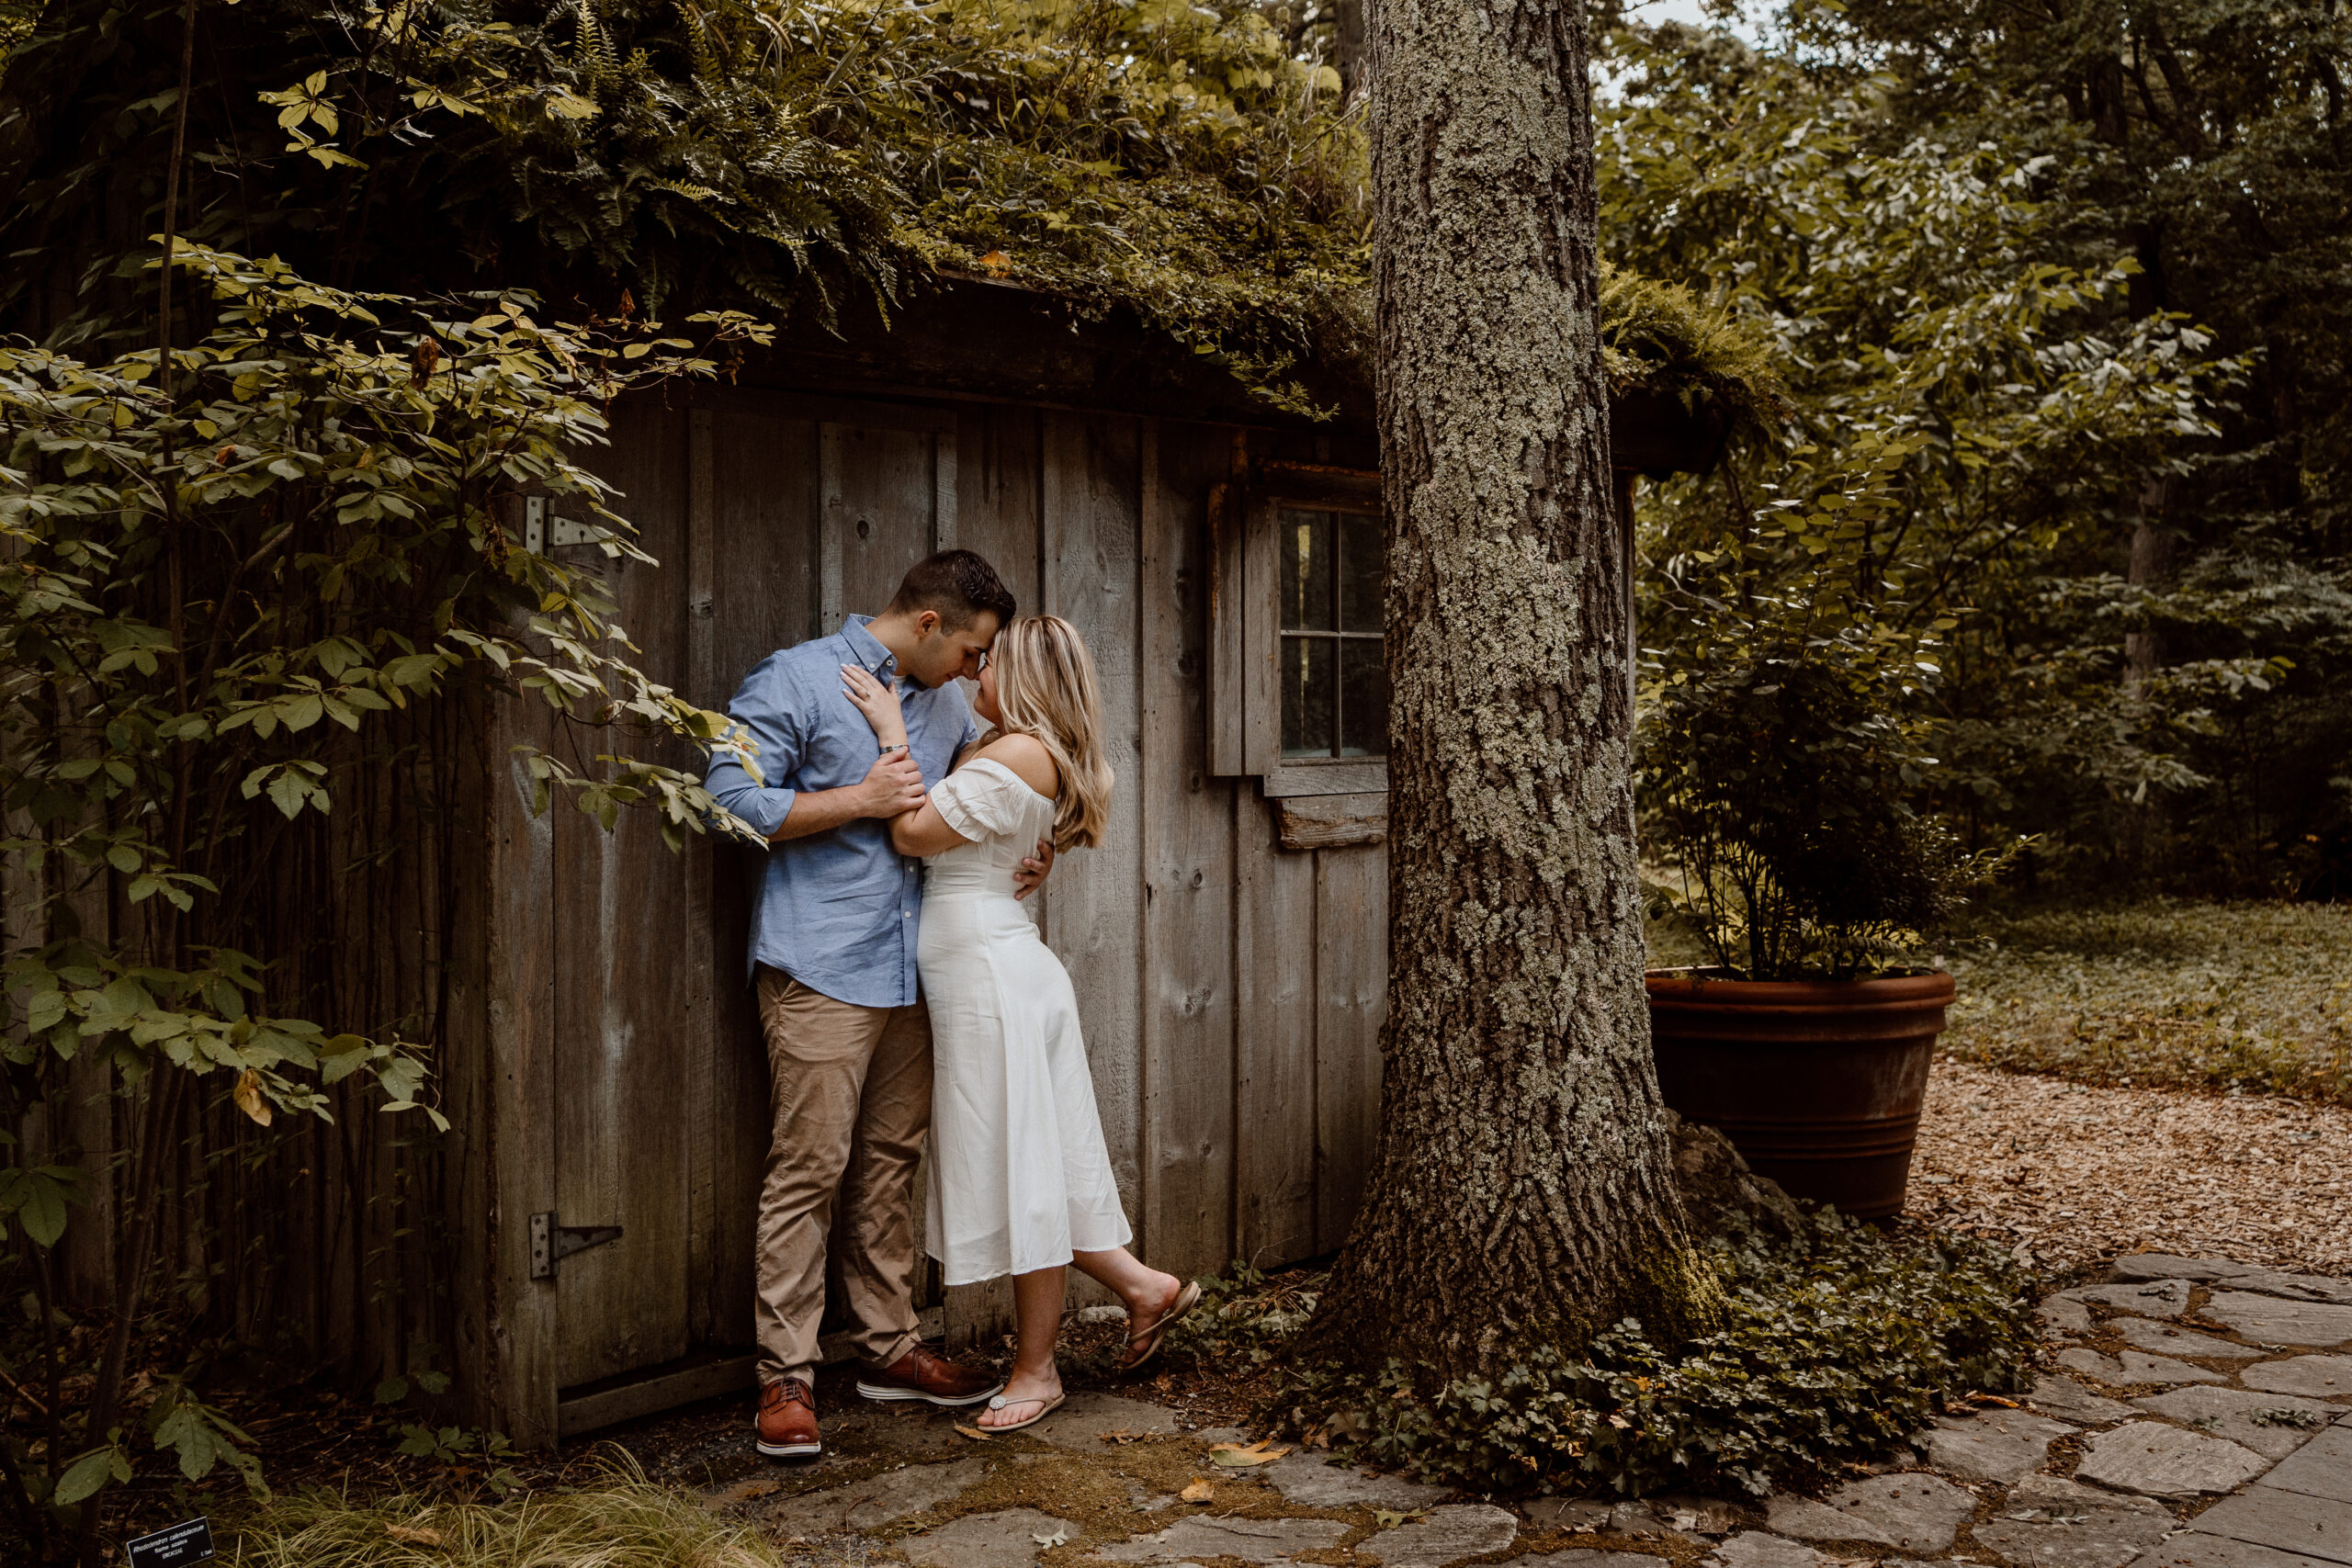 Picturesque engagement session in the natural beauty of Garden in the Woods, Framingham, MA, showcasing the affectionate moments of a couple surrounded by verdant greenery.